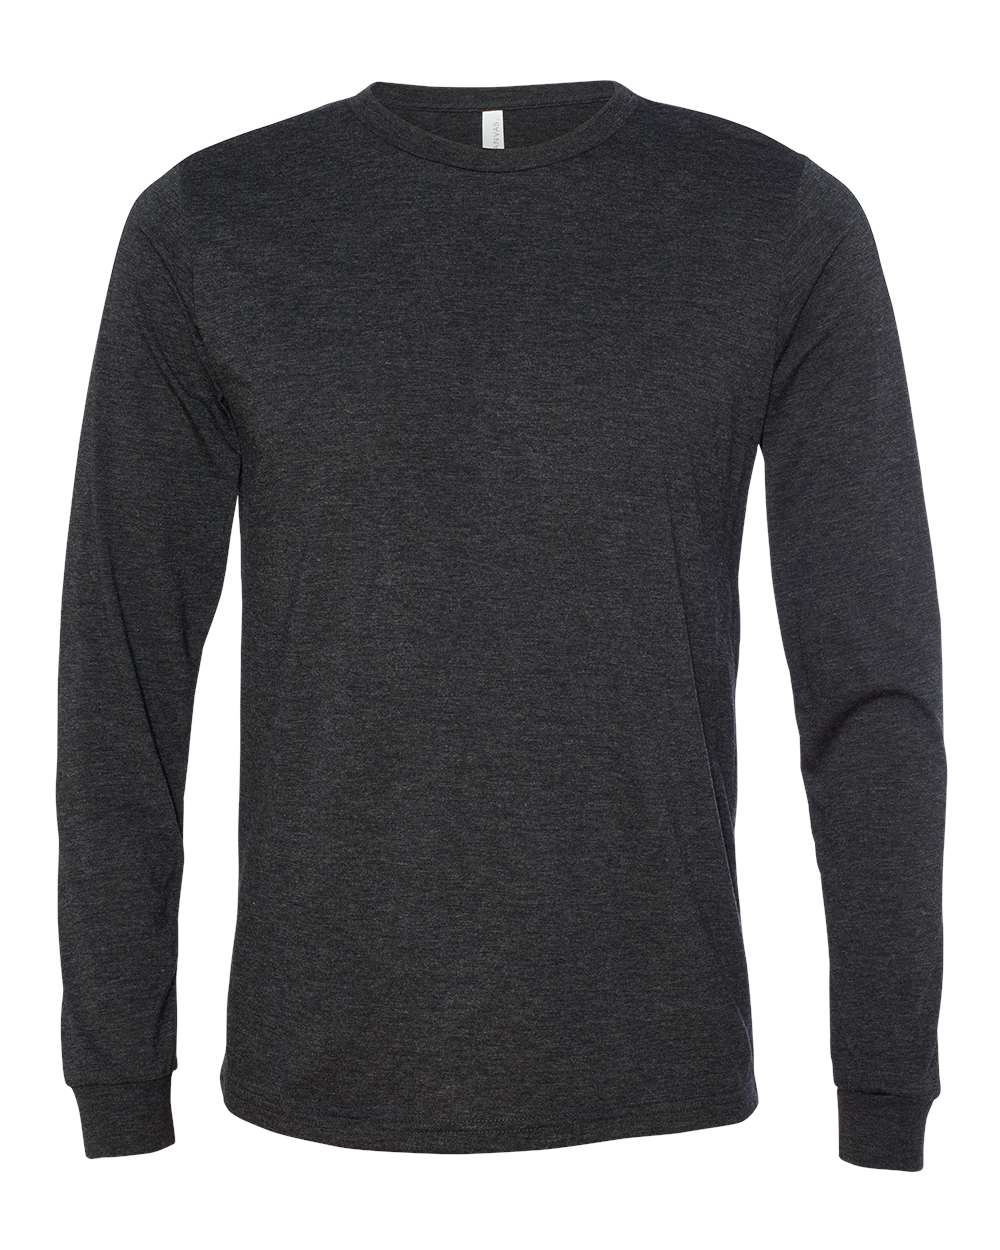 Long Sleeved T Shirts SALE